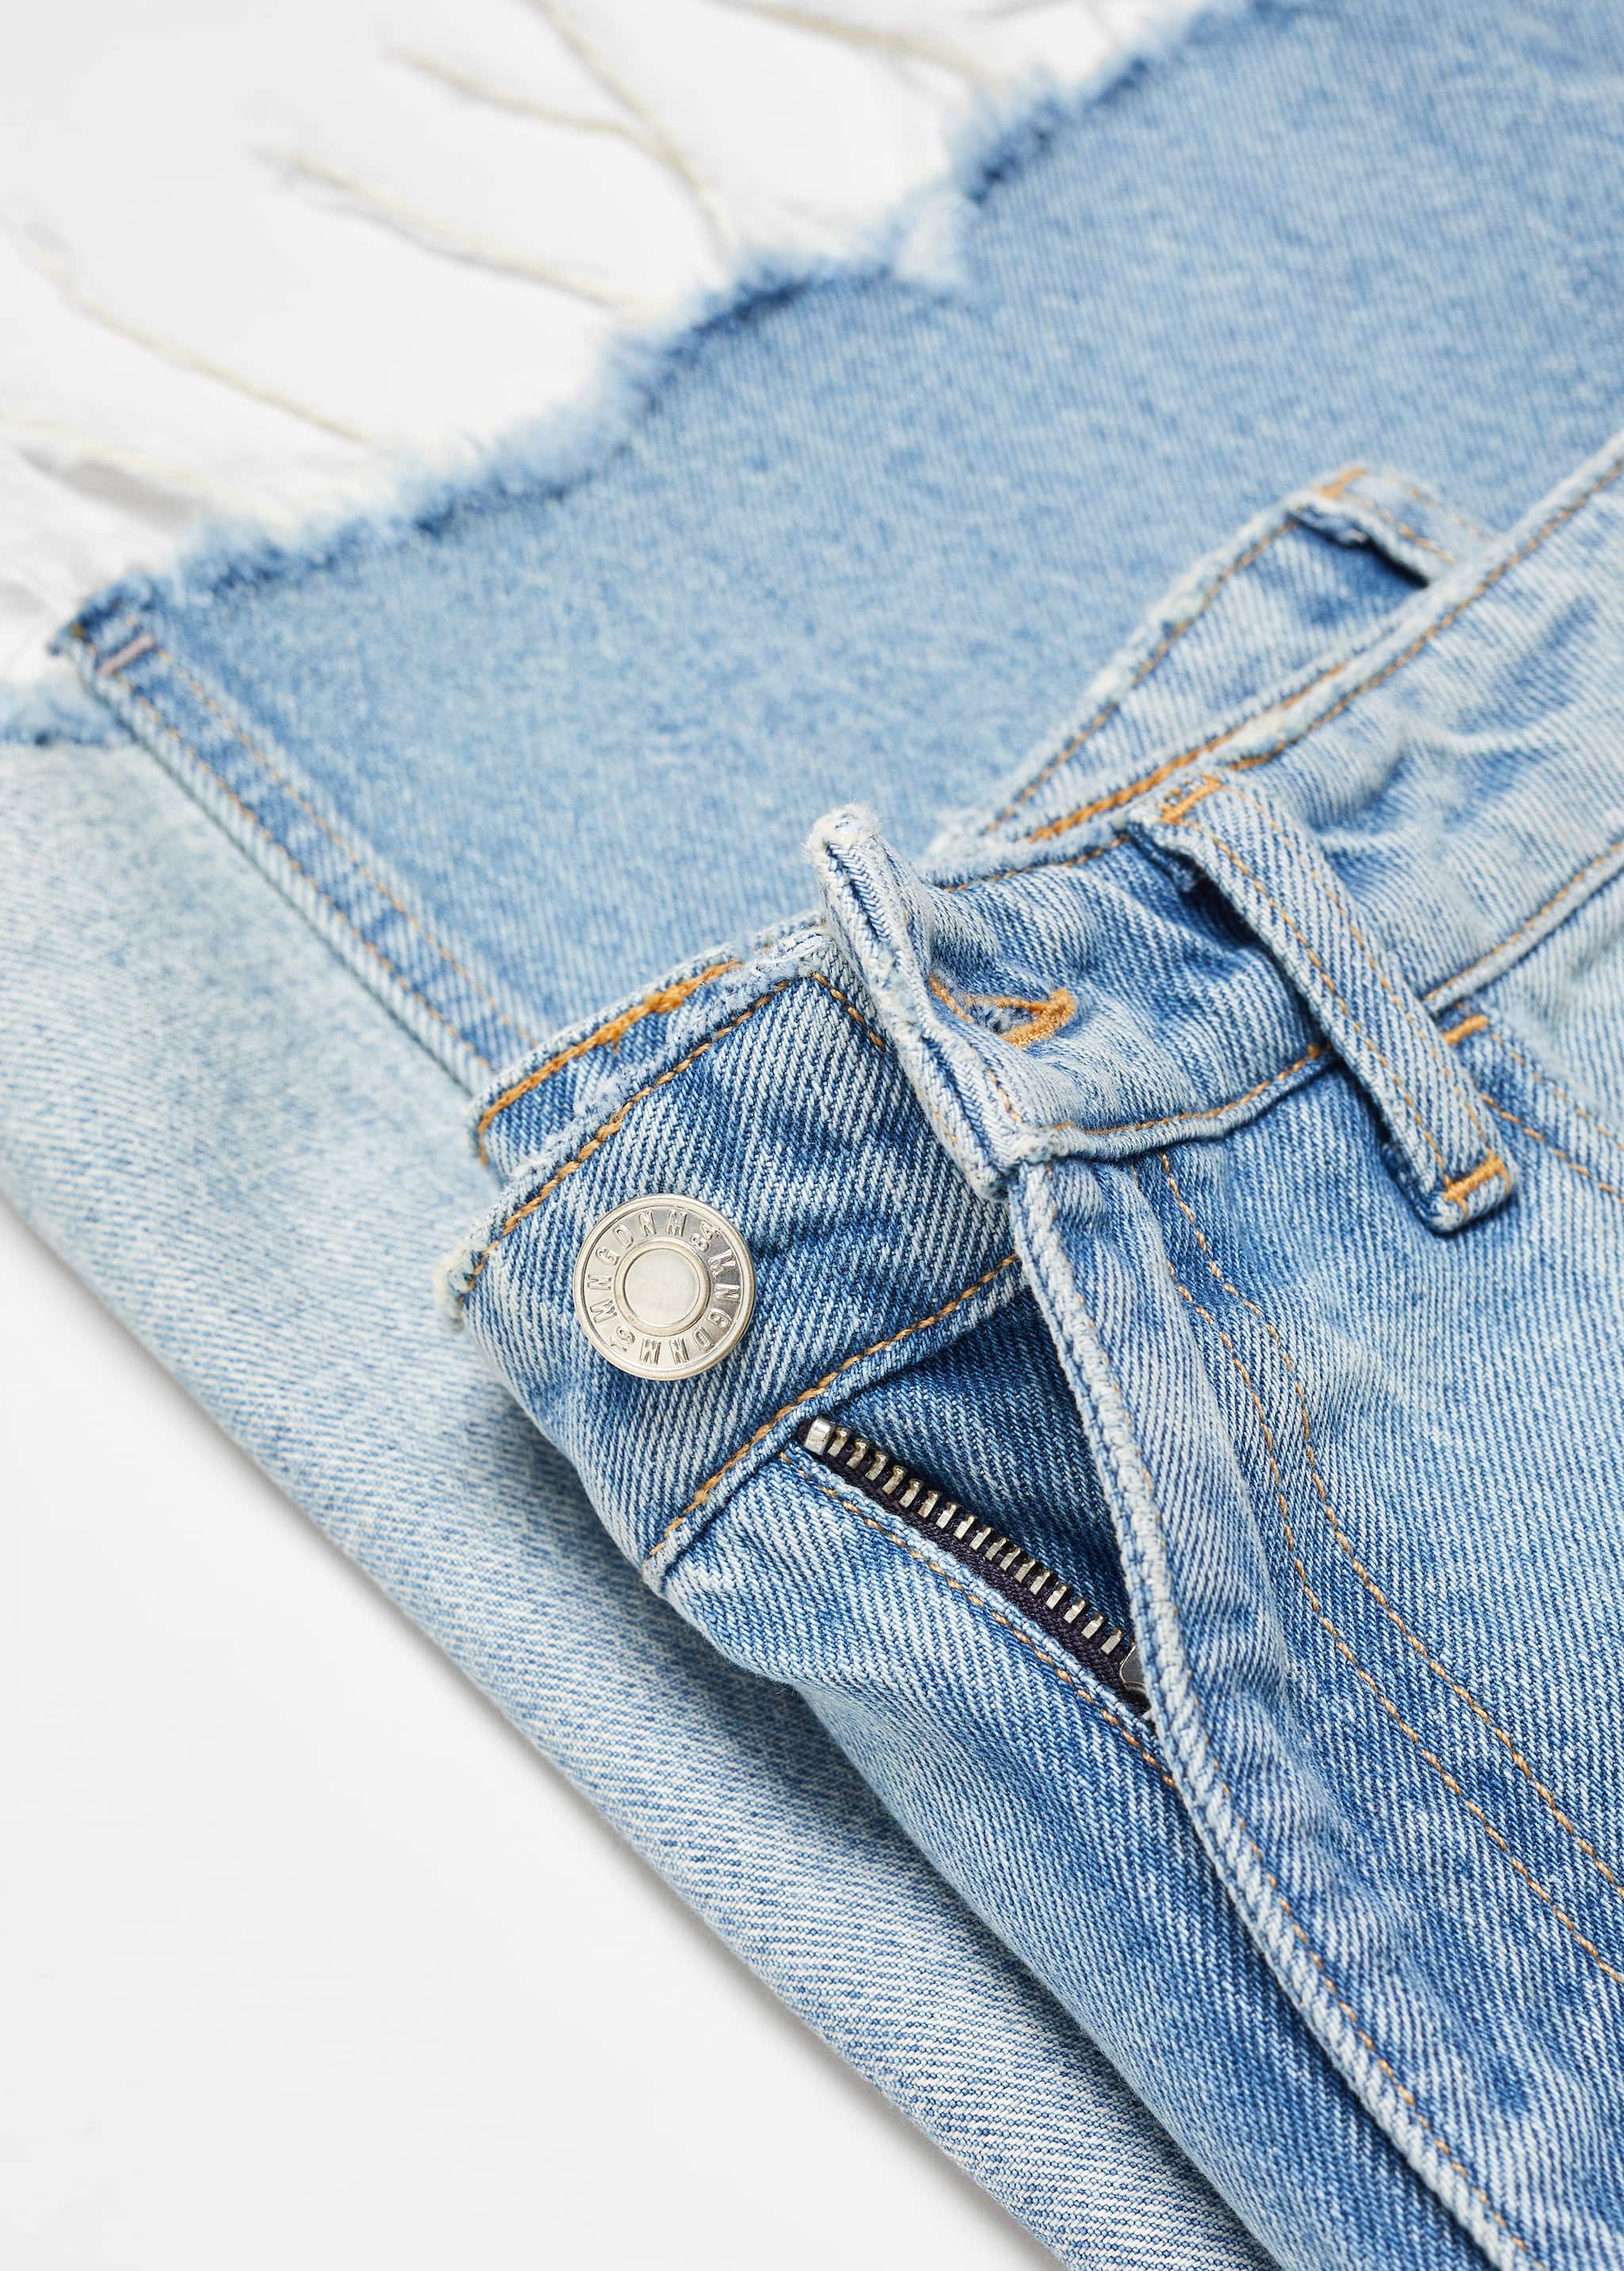 Denim skirt with frayed hem - Details of the article 8